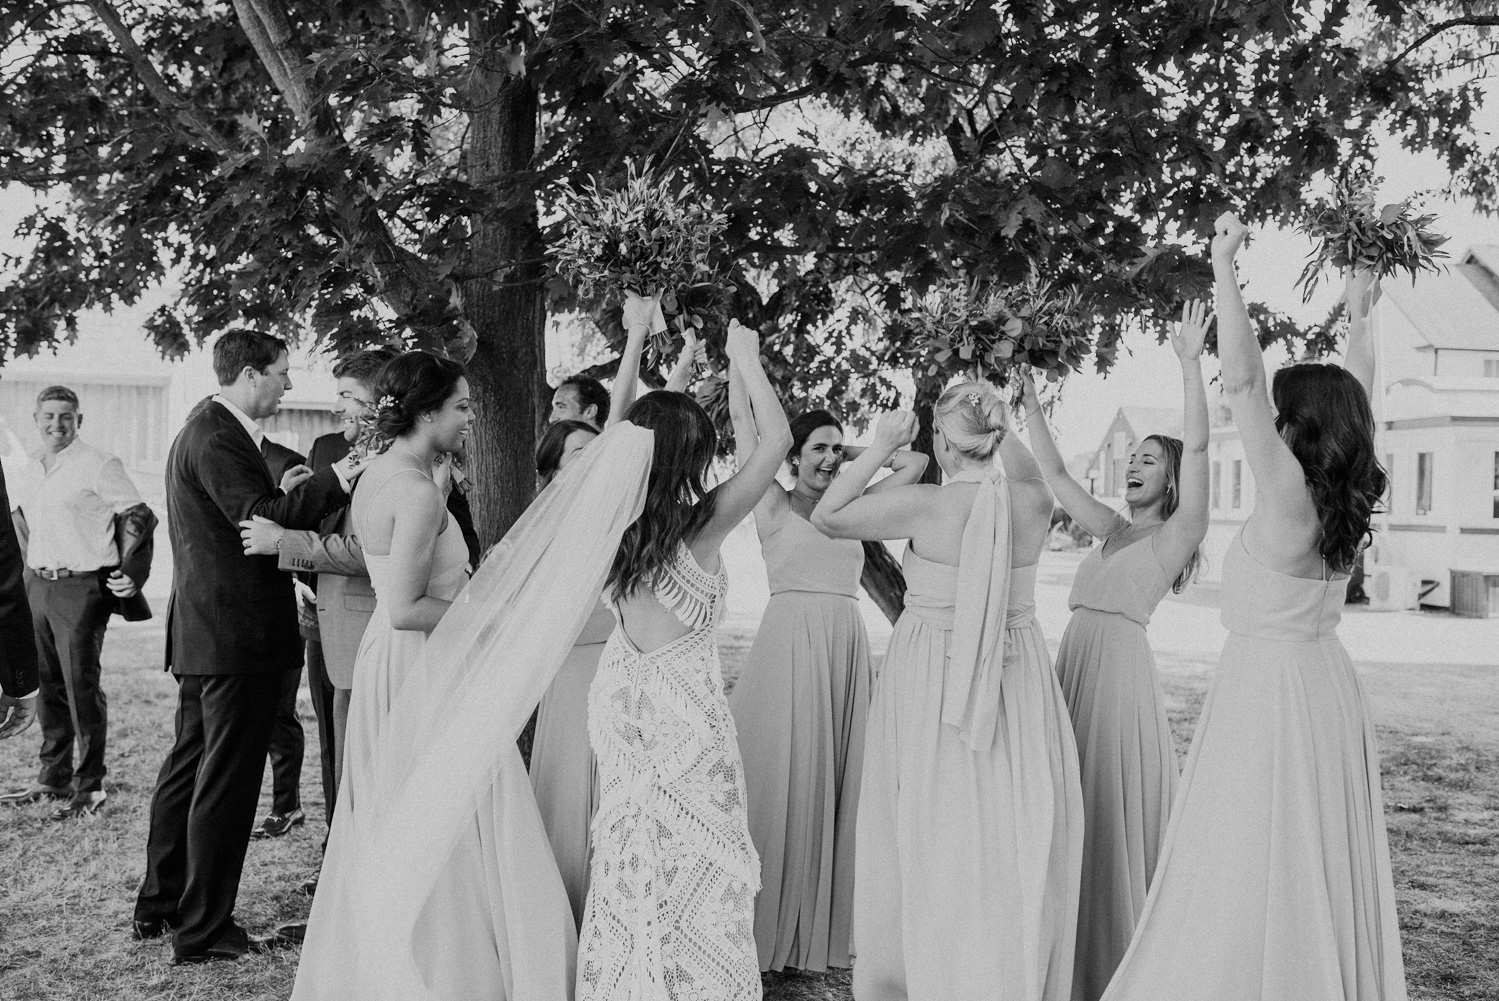 bridesmaids lift their hands in celebration at the end of the wedding ceremony